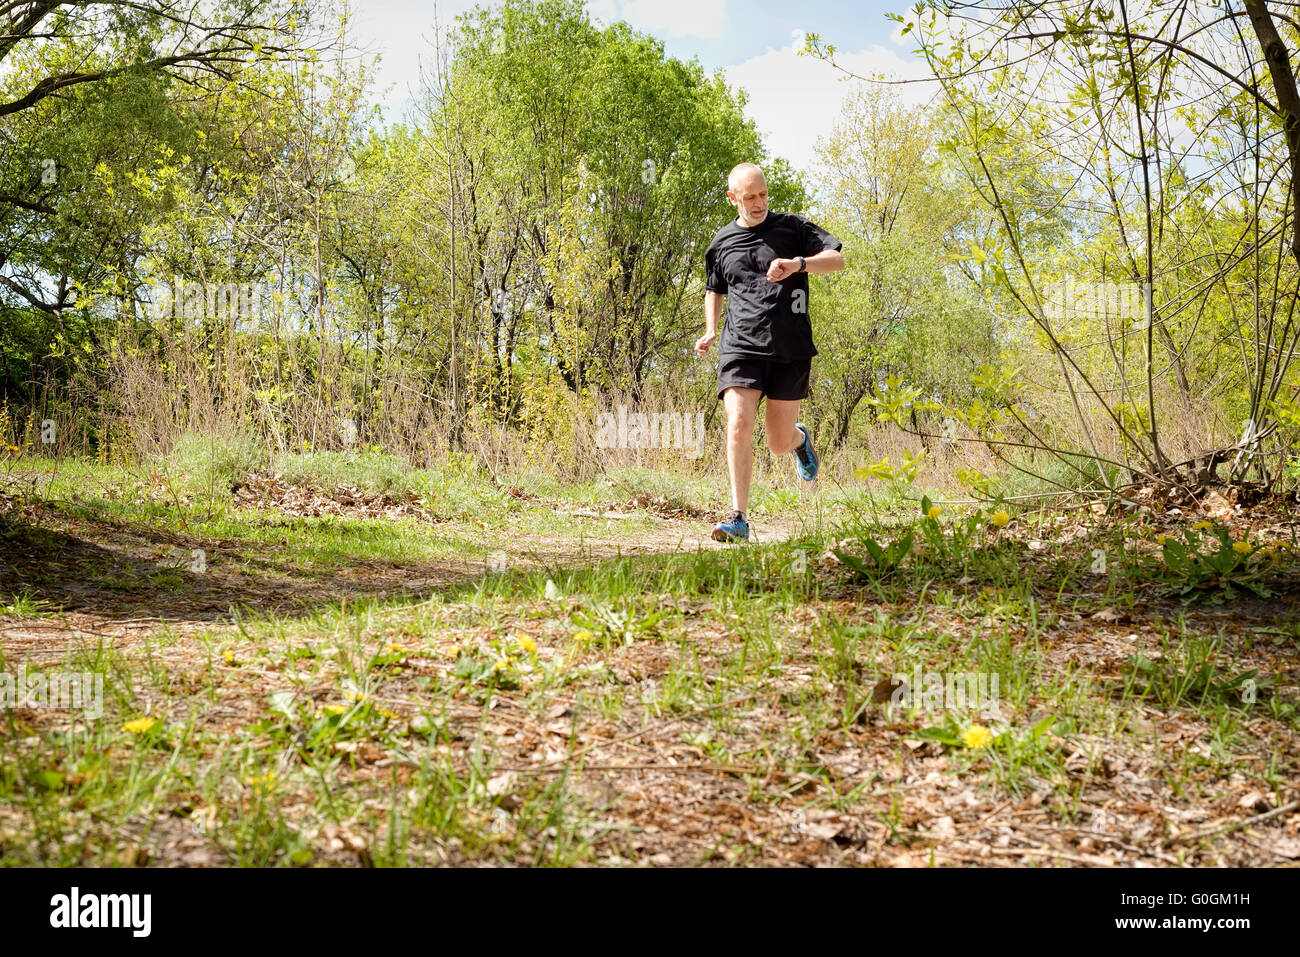 A senior man worn in black is running in the forest, and looks at the time on his stopwatch, during a warm spring day Stock Photo